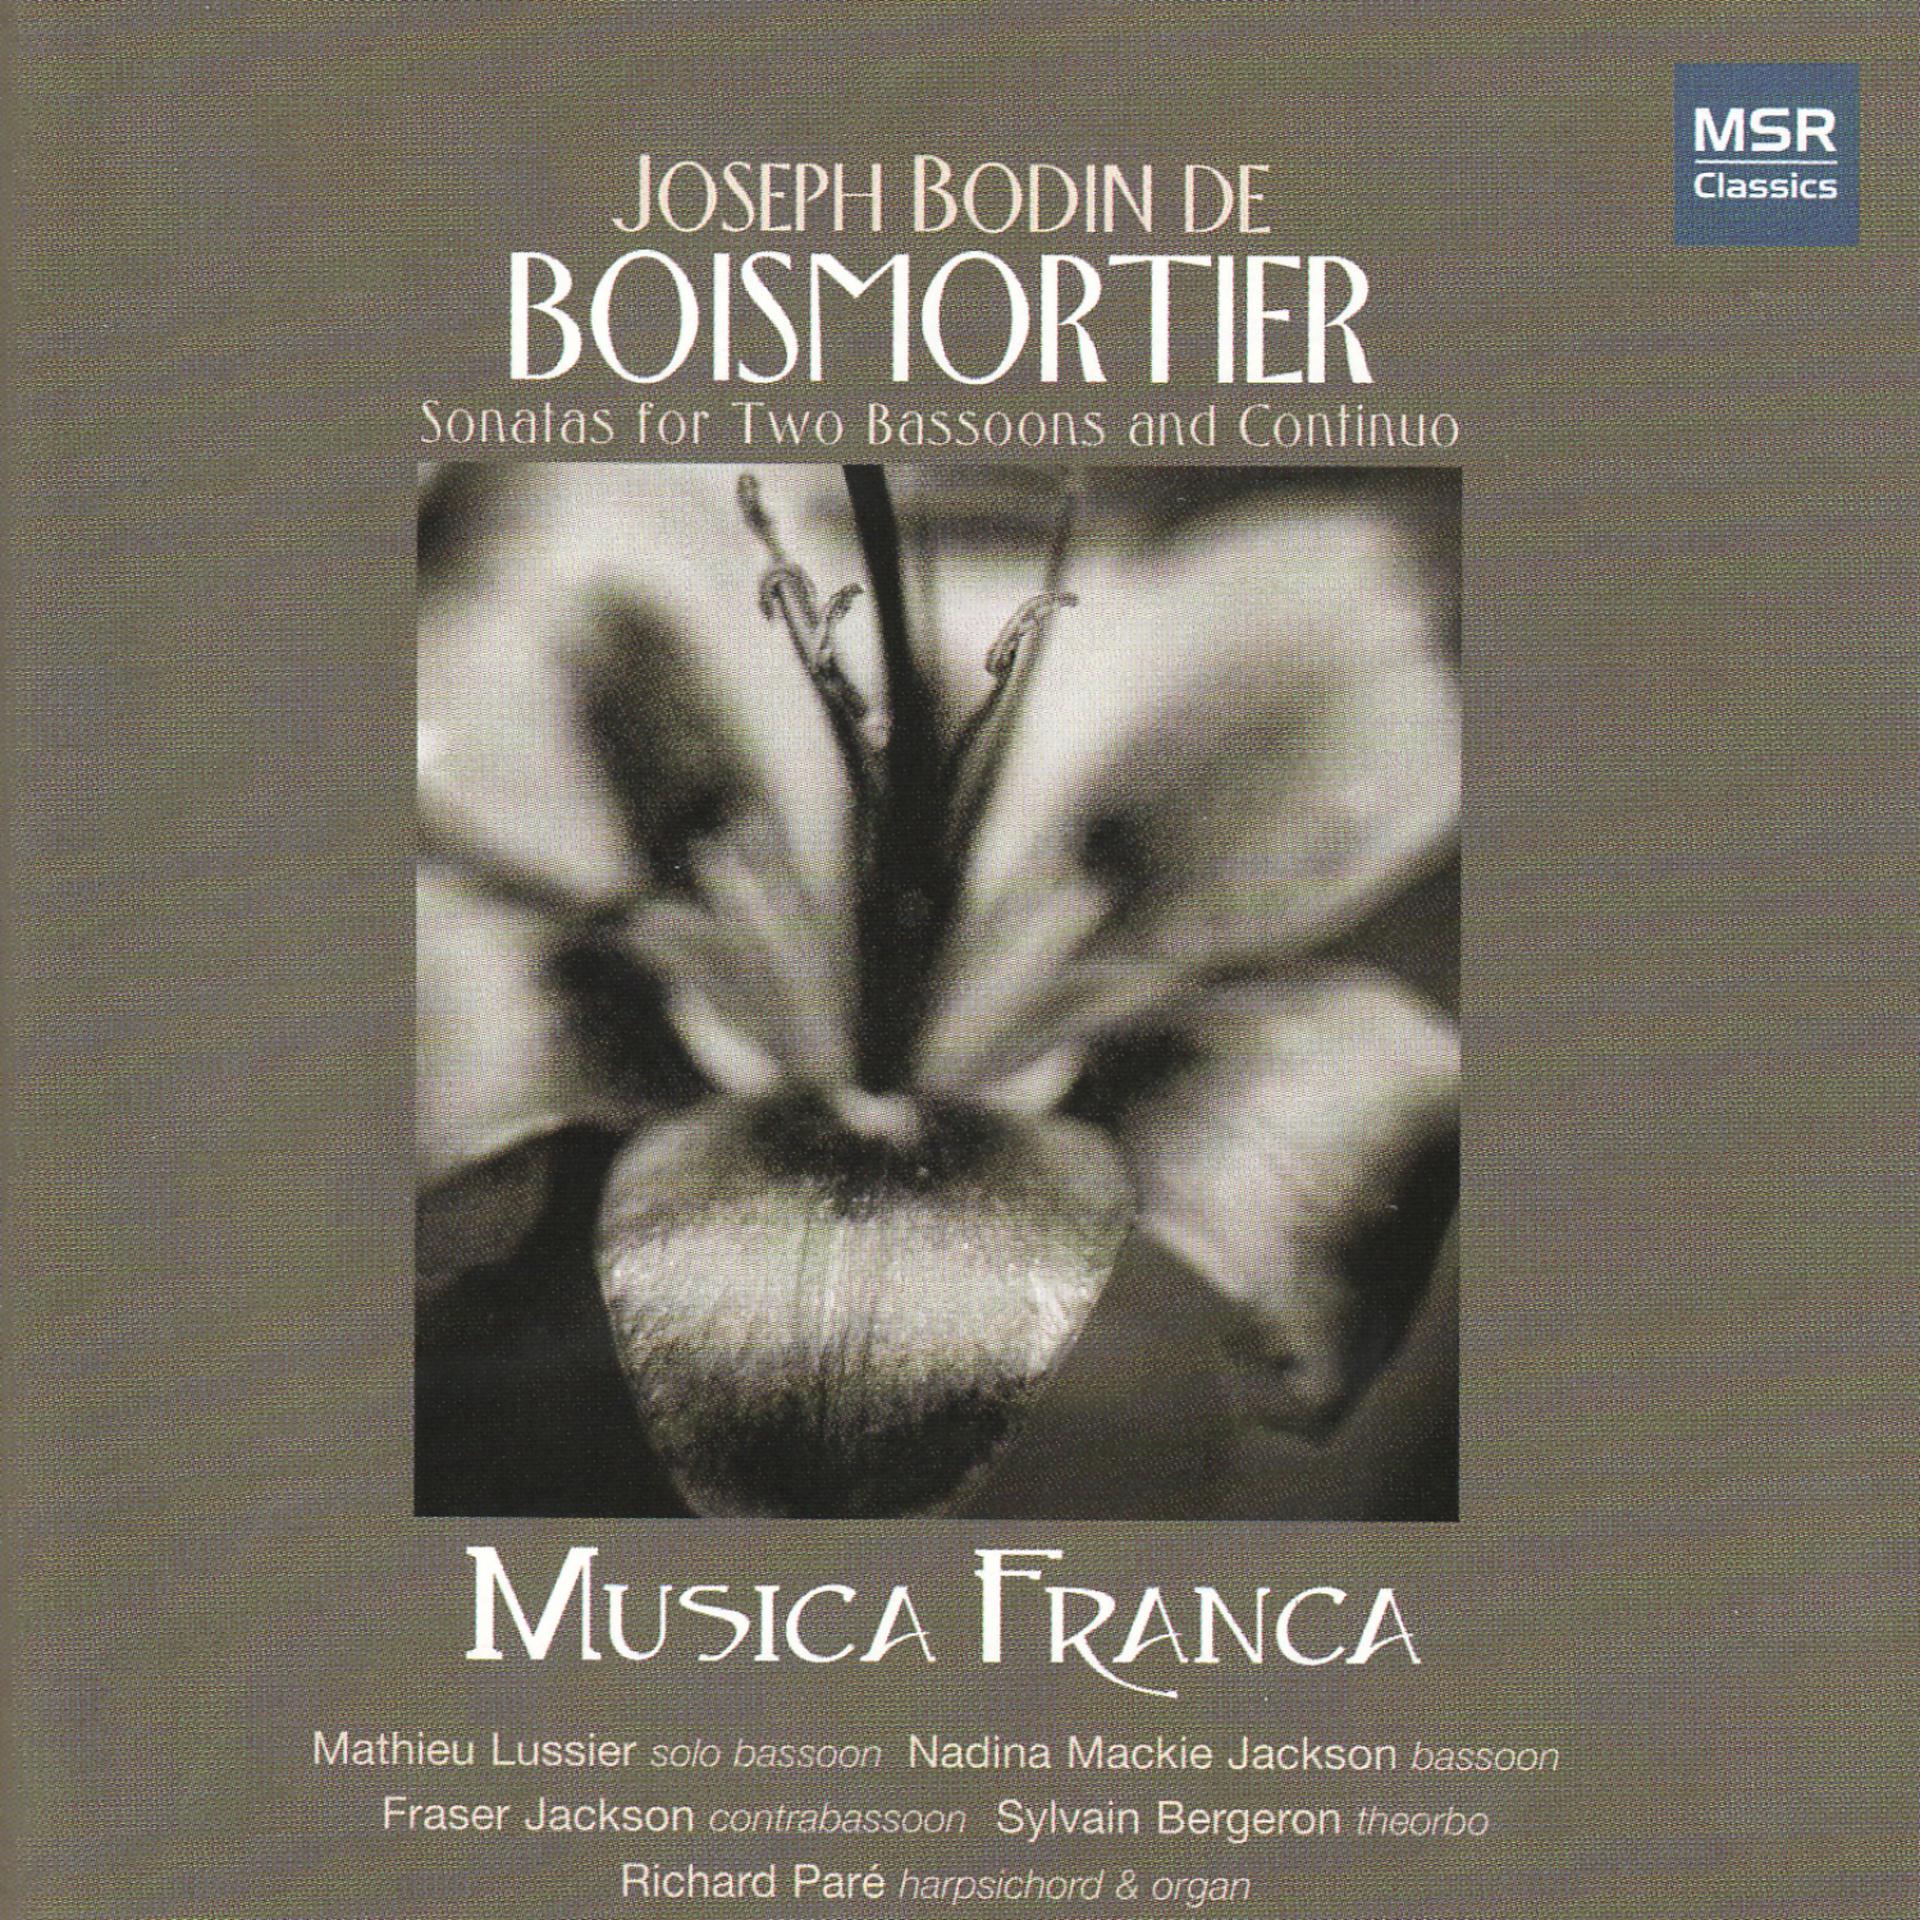 Постер альбома Boismortier: Sonatas for Two Bassoons and Continuo